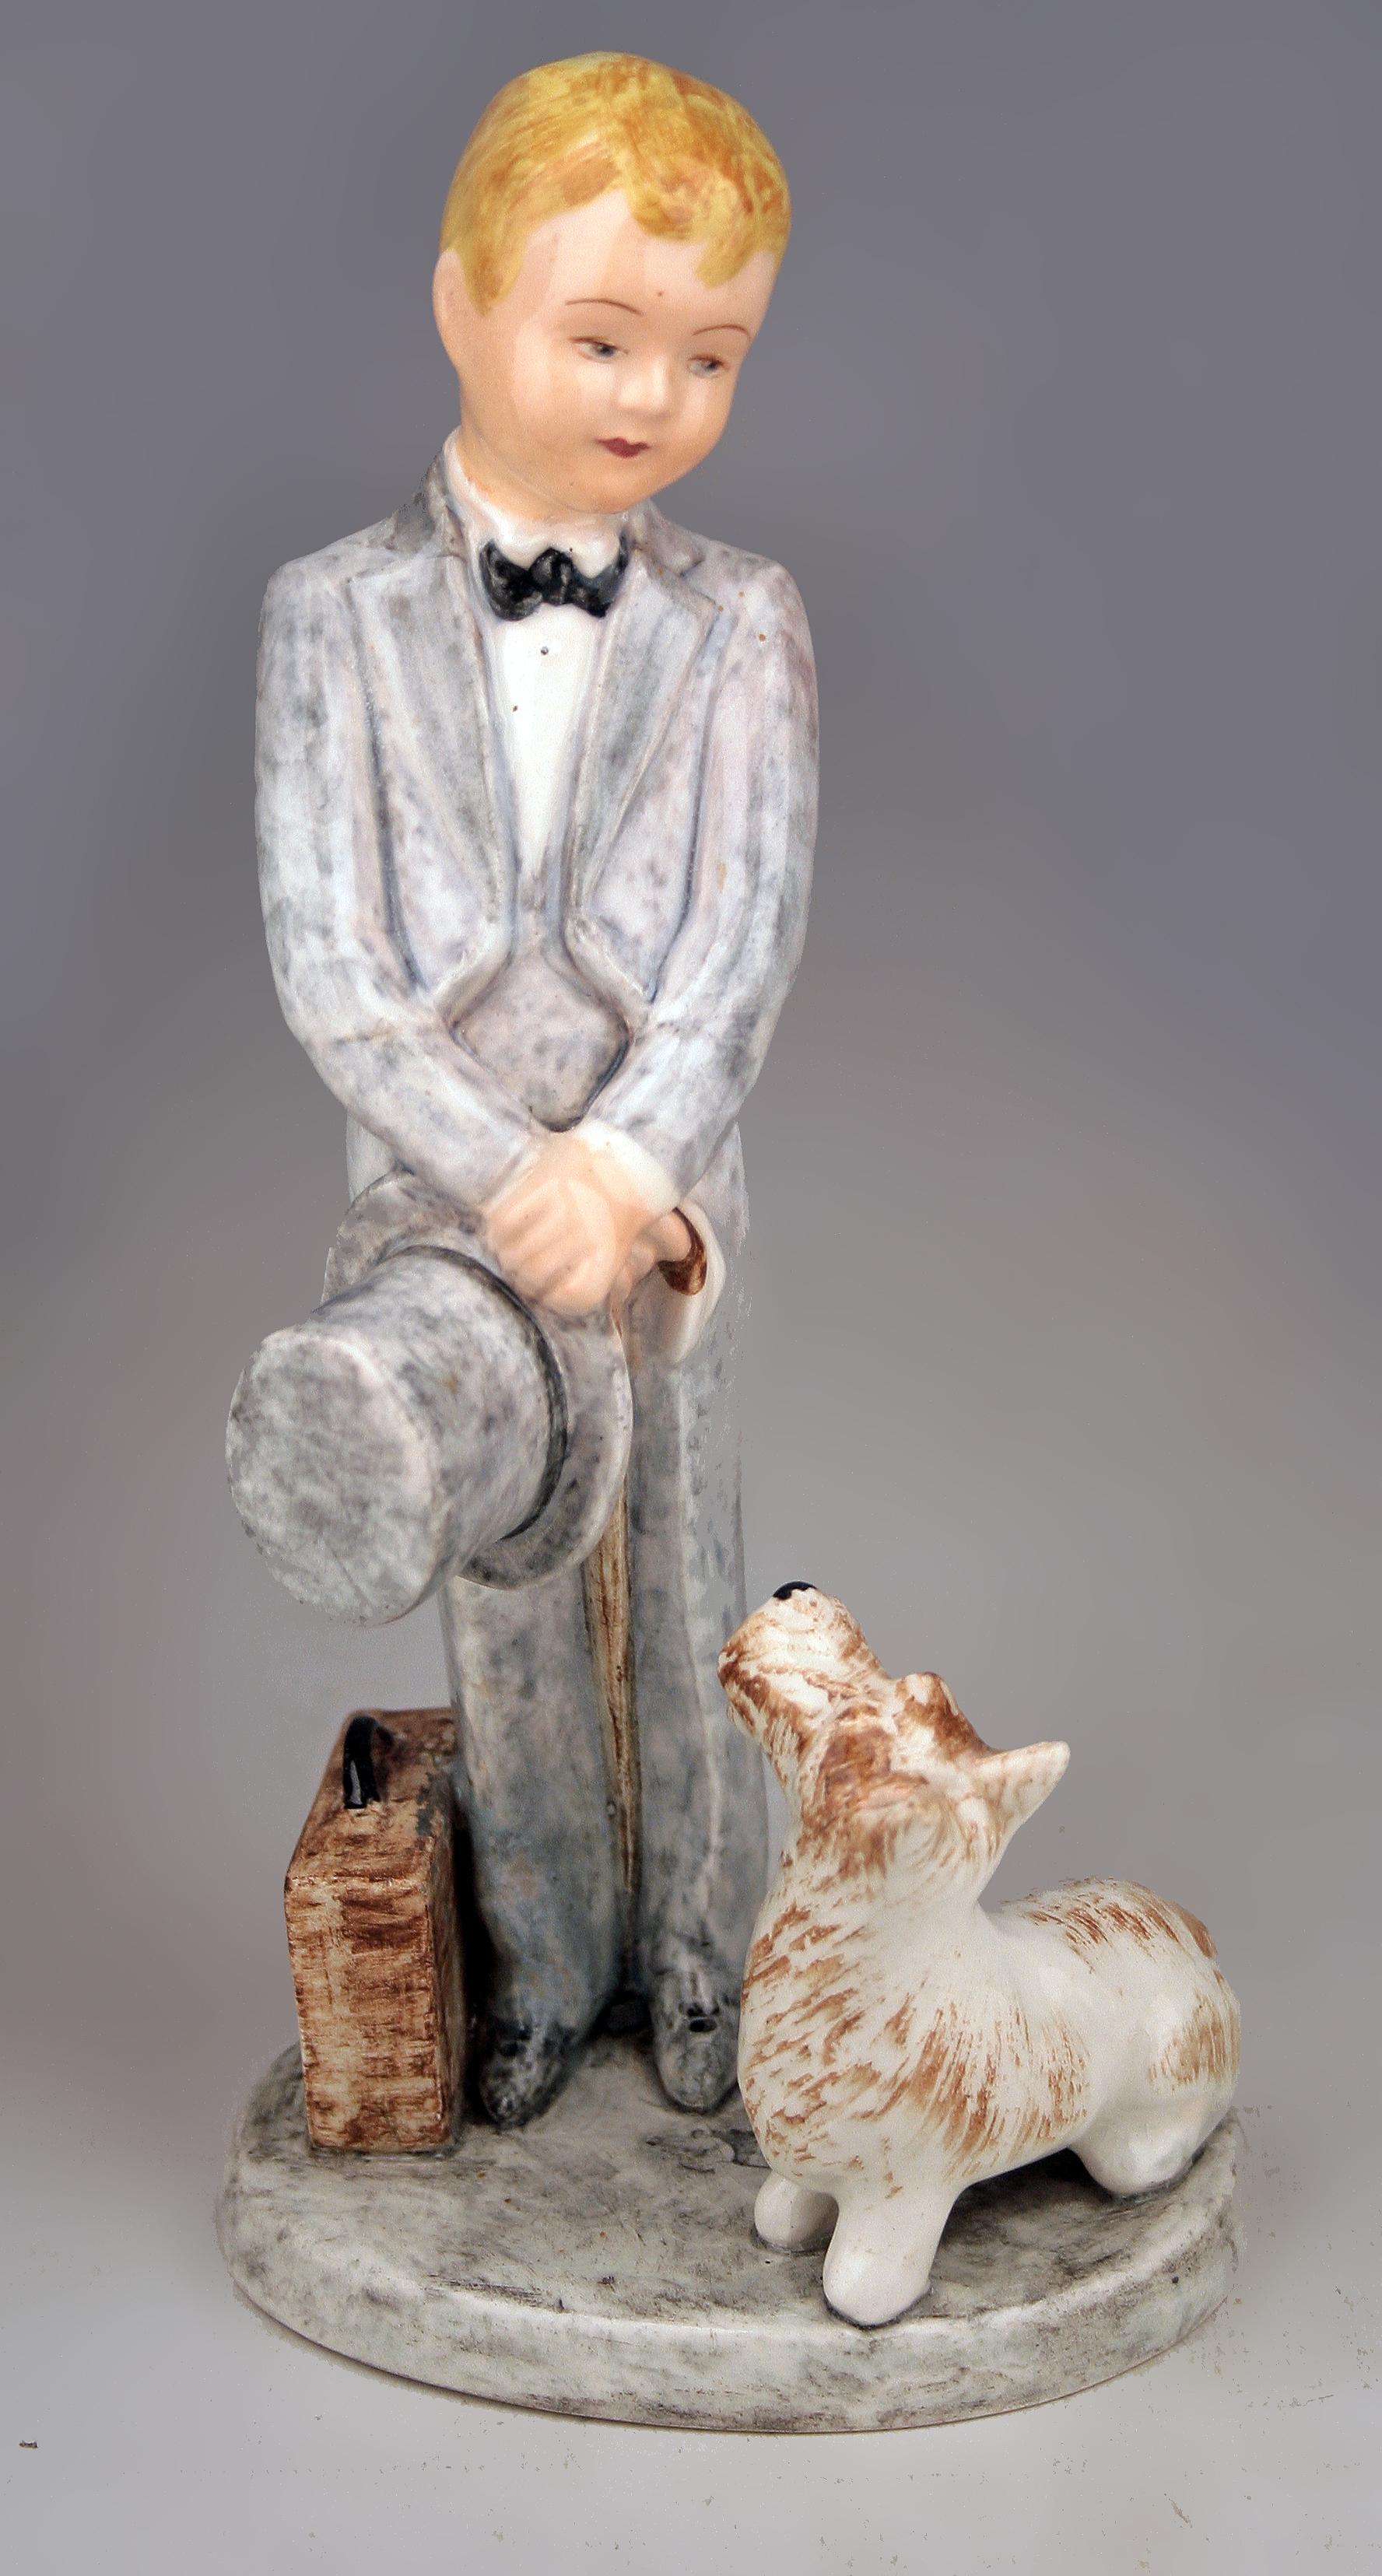 Mid-20th century hand-painted glazed porcelain figurine of boy and dog by Marcel Goldscheider for Myott Son & Co.

By: Marcel Goldscheider, Myott Son & Co
Material: porcelain, paint, ceramic
Technique: glazed, hand-painted, pressed, molded, painted,